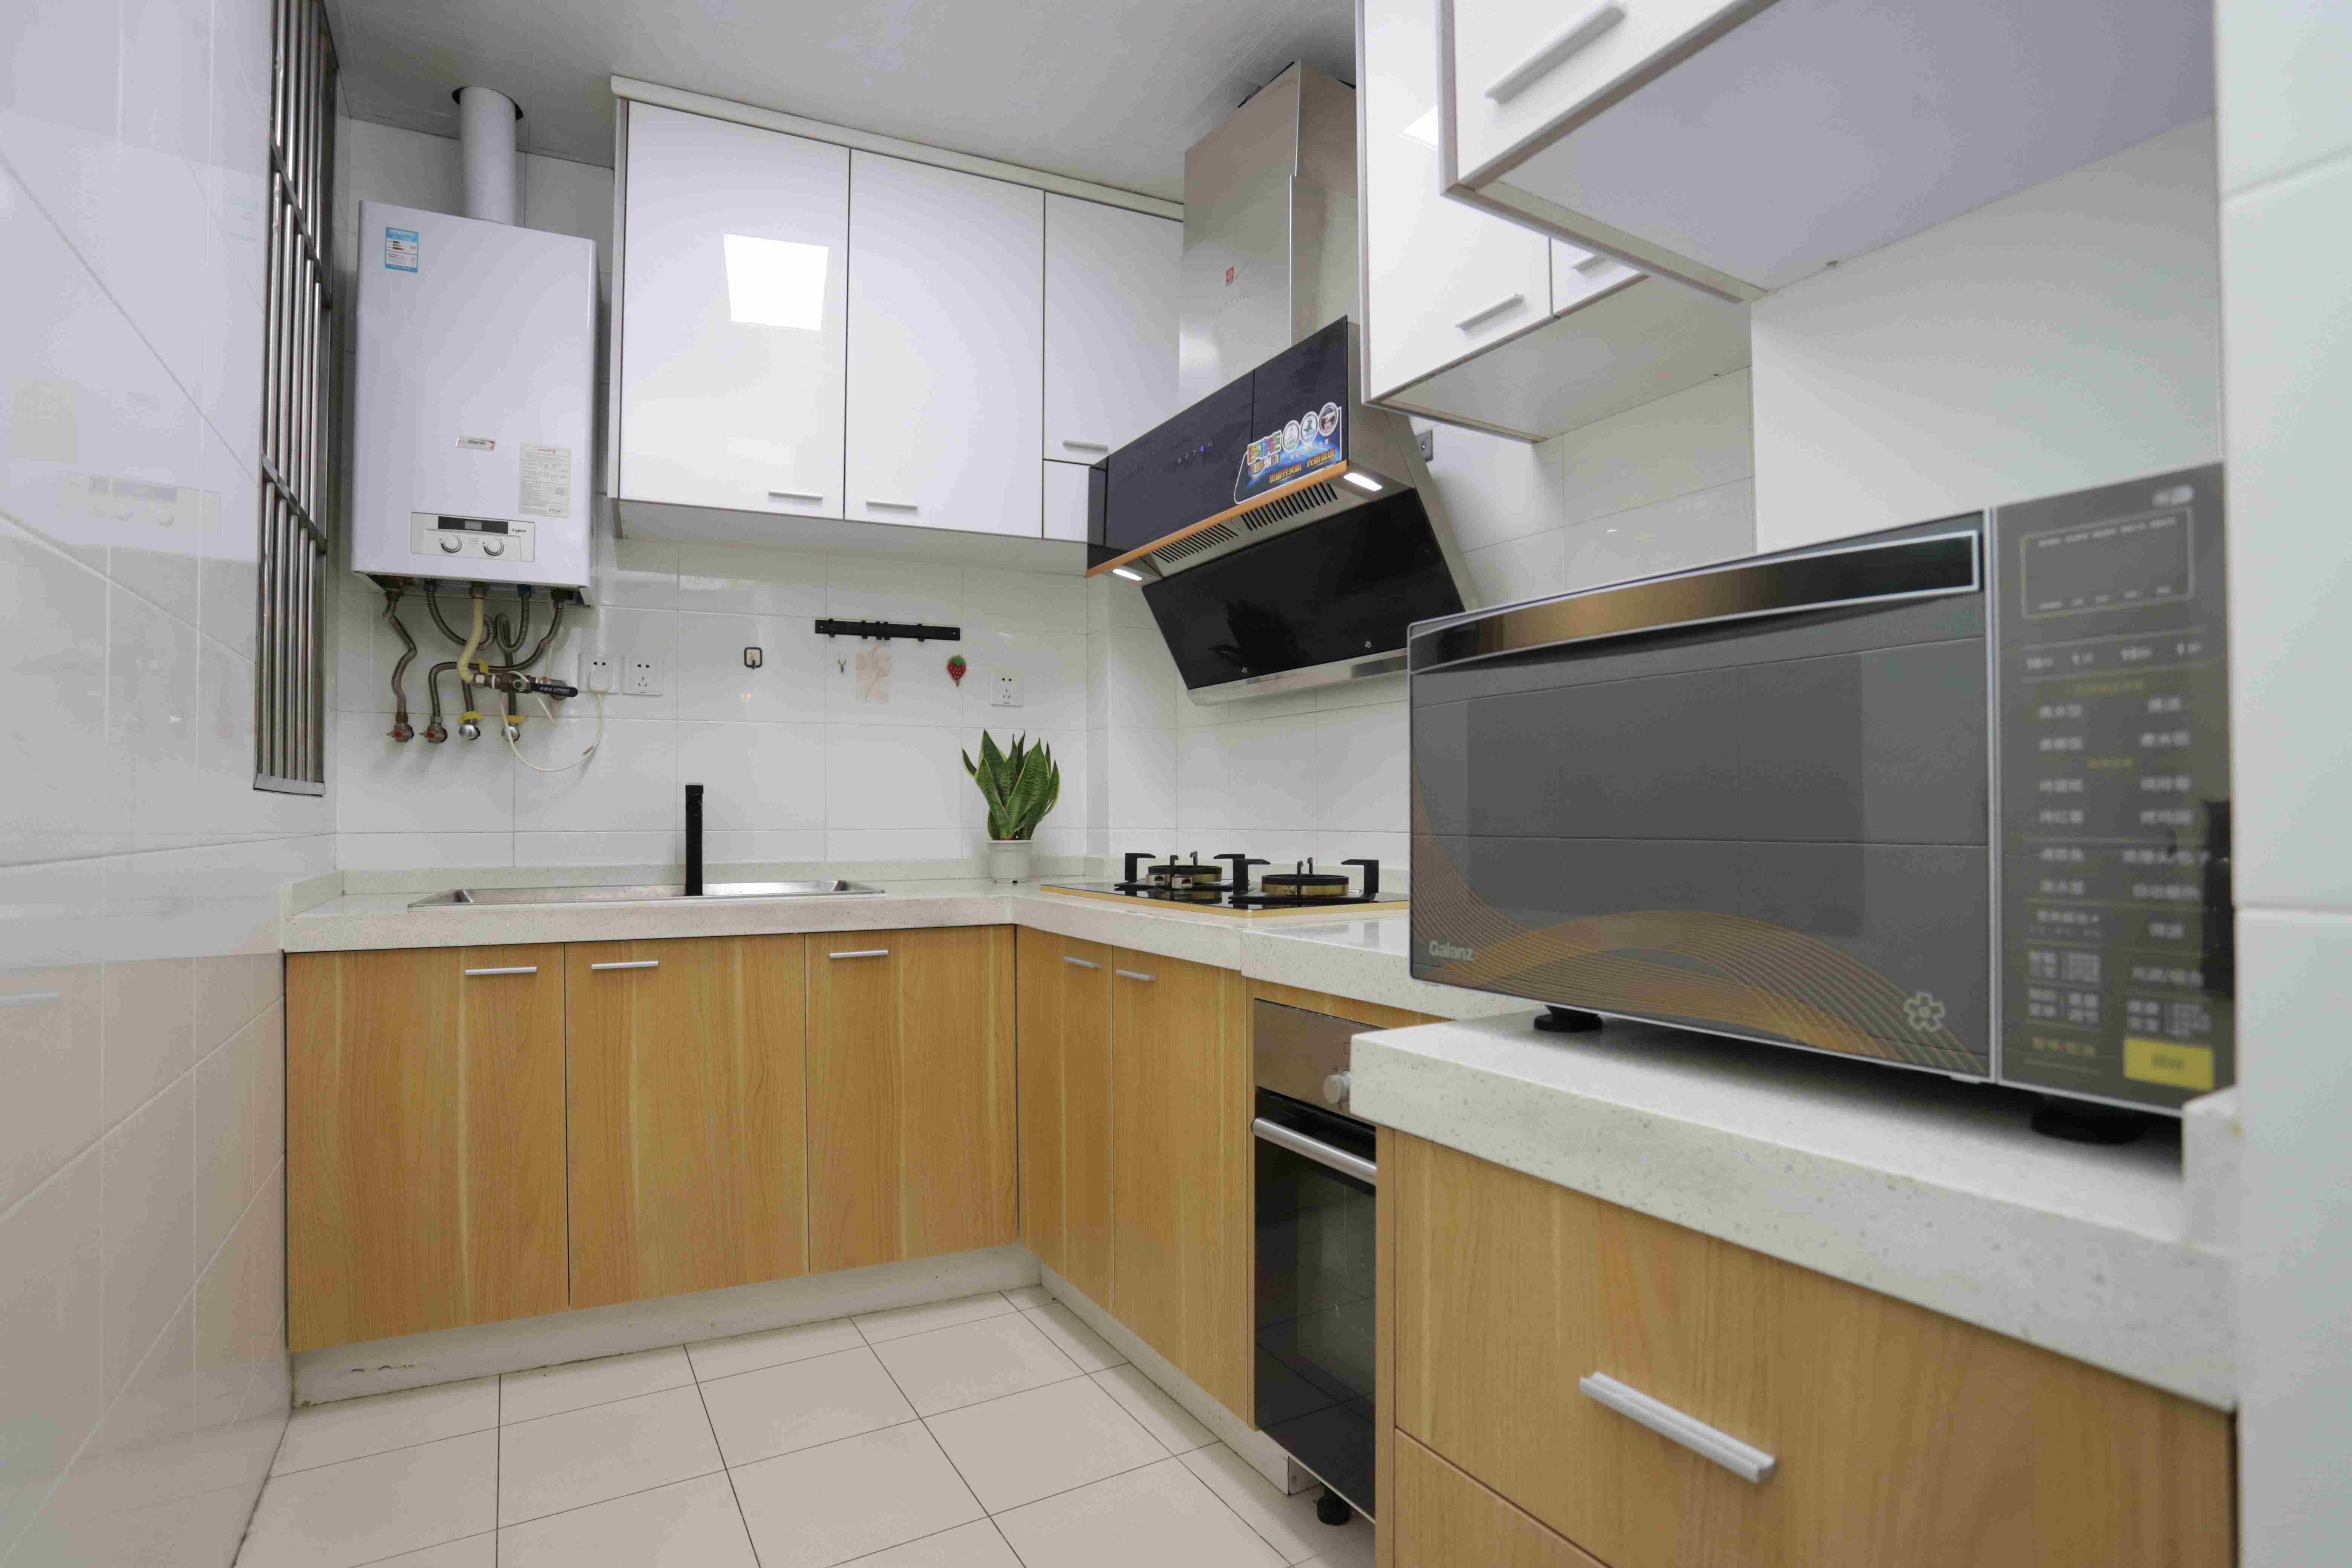 nice kitchen Modern Cozy Spacious Top-end Ladoll 1BR Apt for Rent in Shanghai